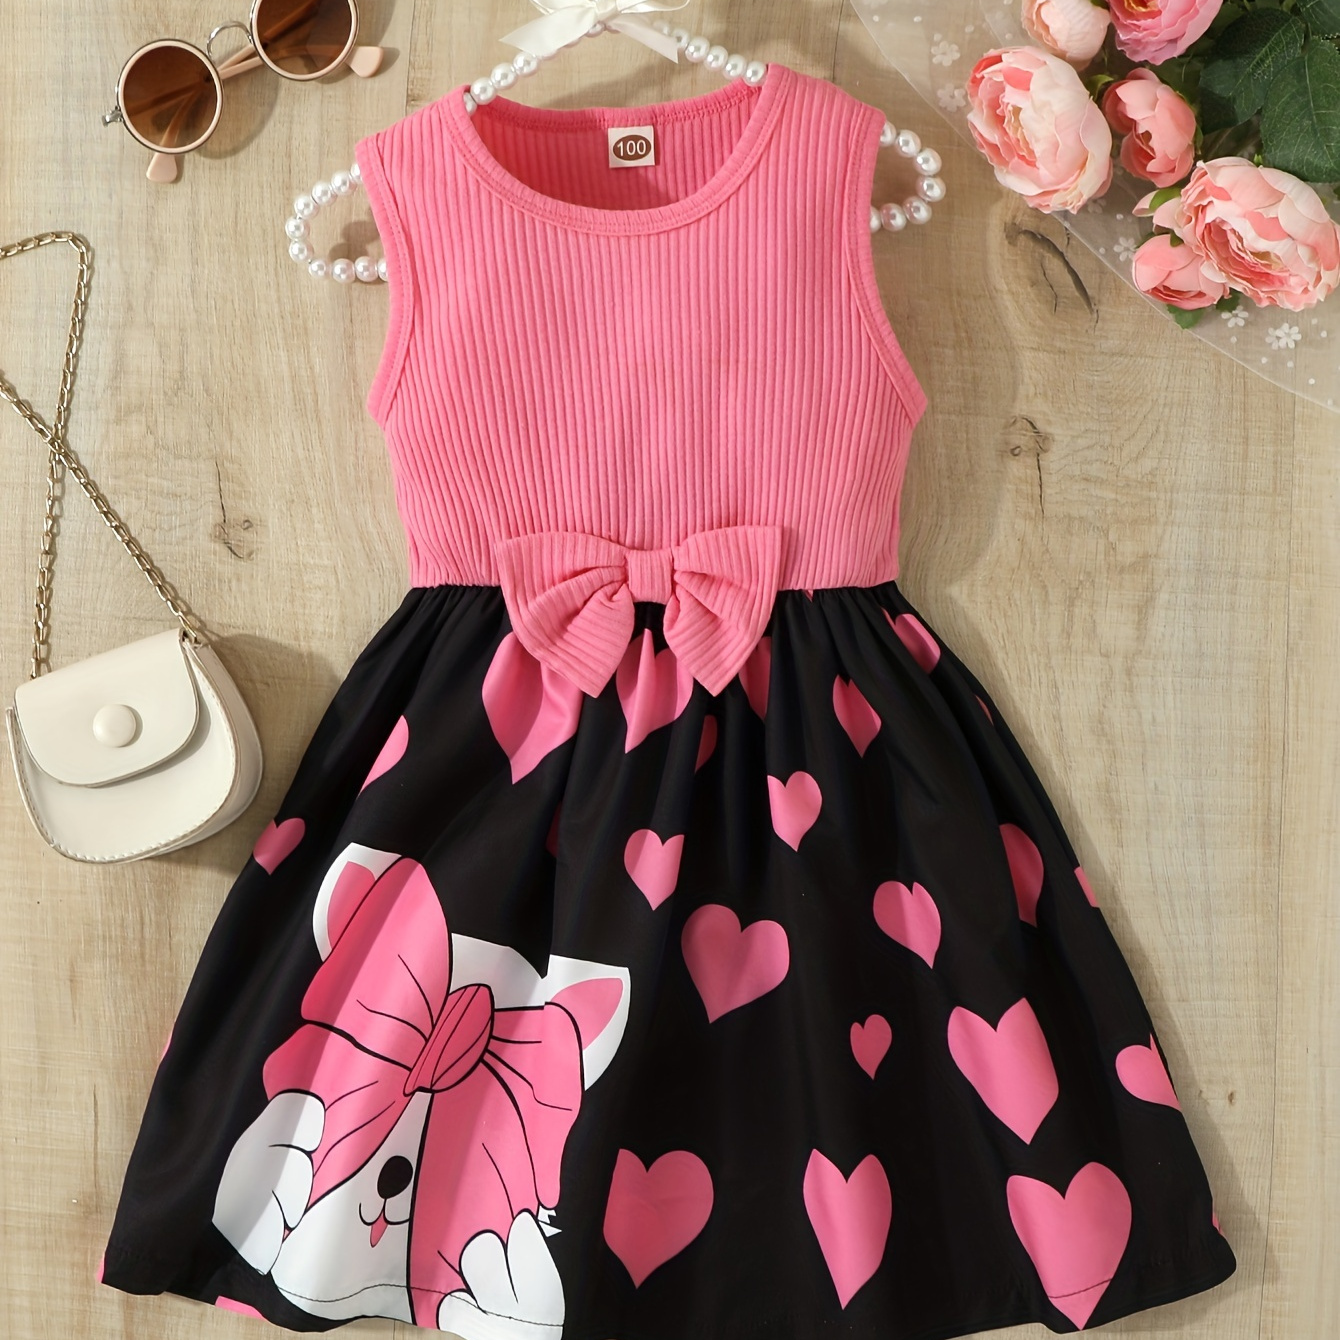 

Girls Cute Dress Solid Color Sleeveless Pit Stripe Top Stitching Allover Love Hearts Print Hem Bow Waist Lovely Dress